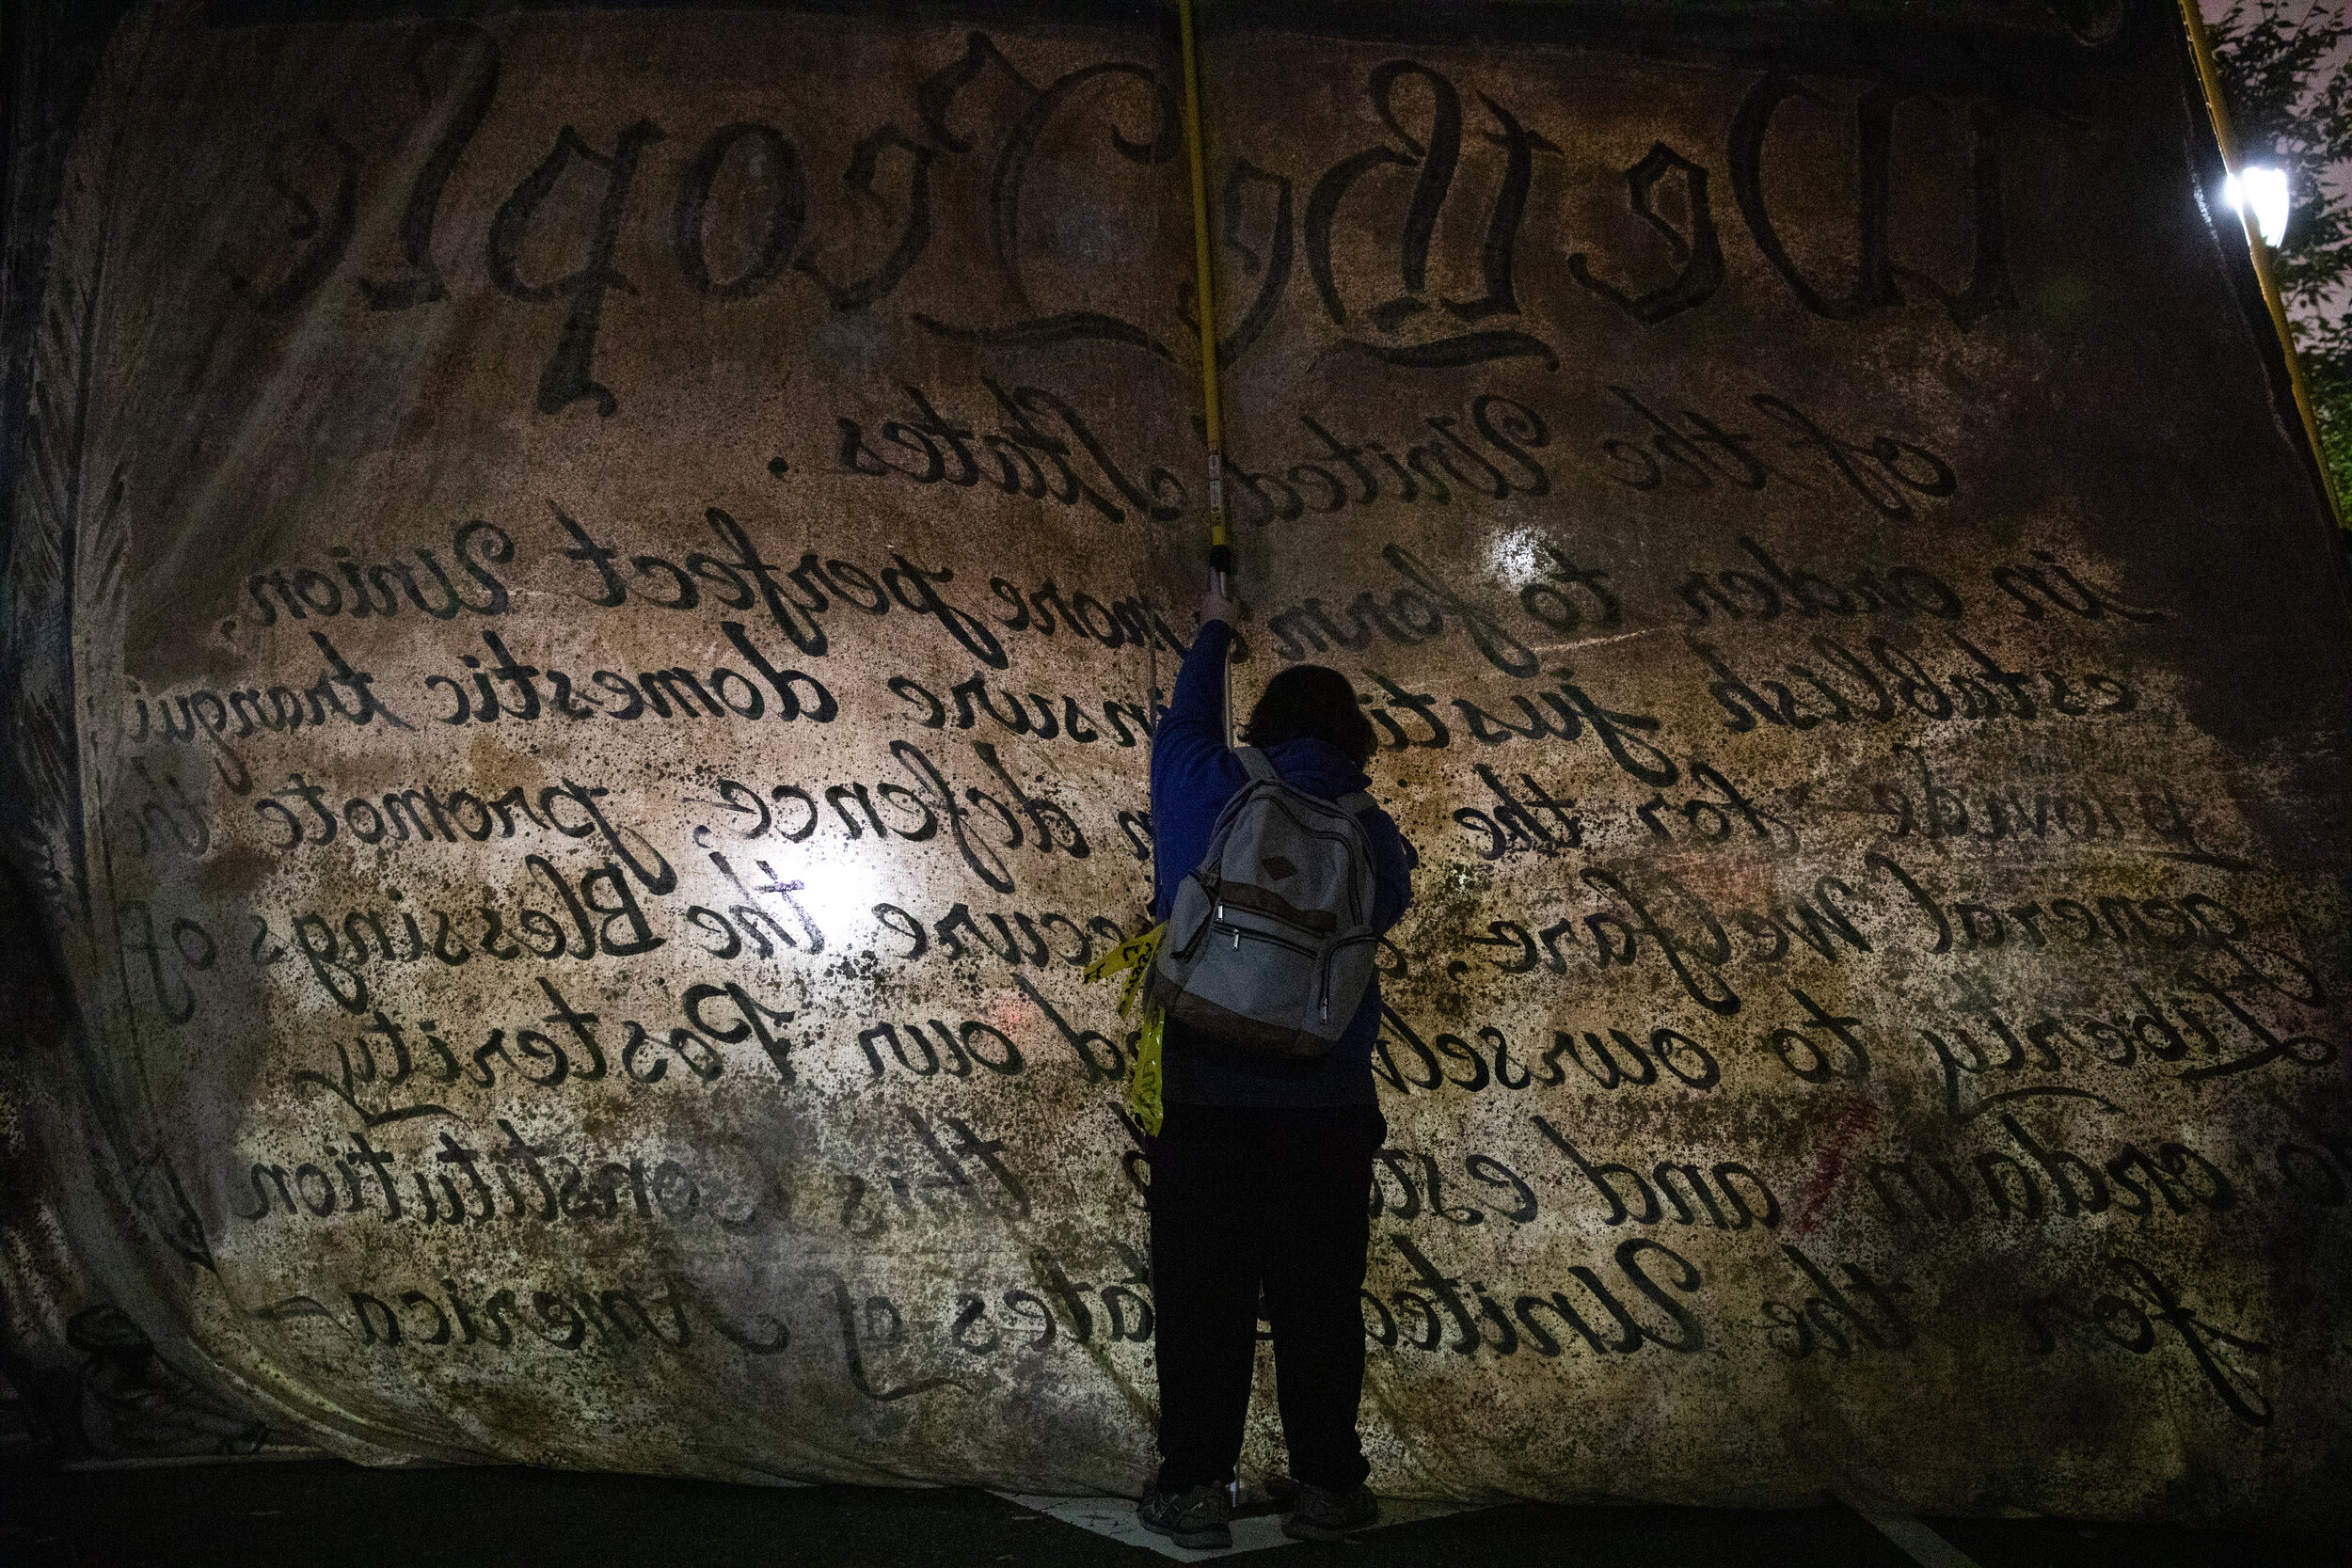   A person holds up a large recreation of the U.S. Constitution during a rally outside of the Pennsylvania Convention Center in Philadelphia as votes were being counted for the 2020 presidential election.    